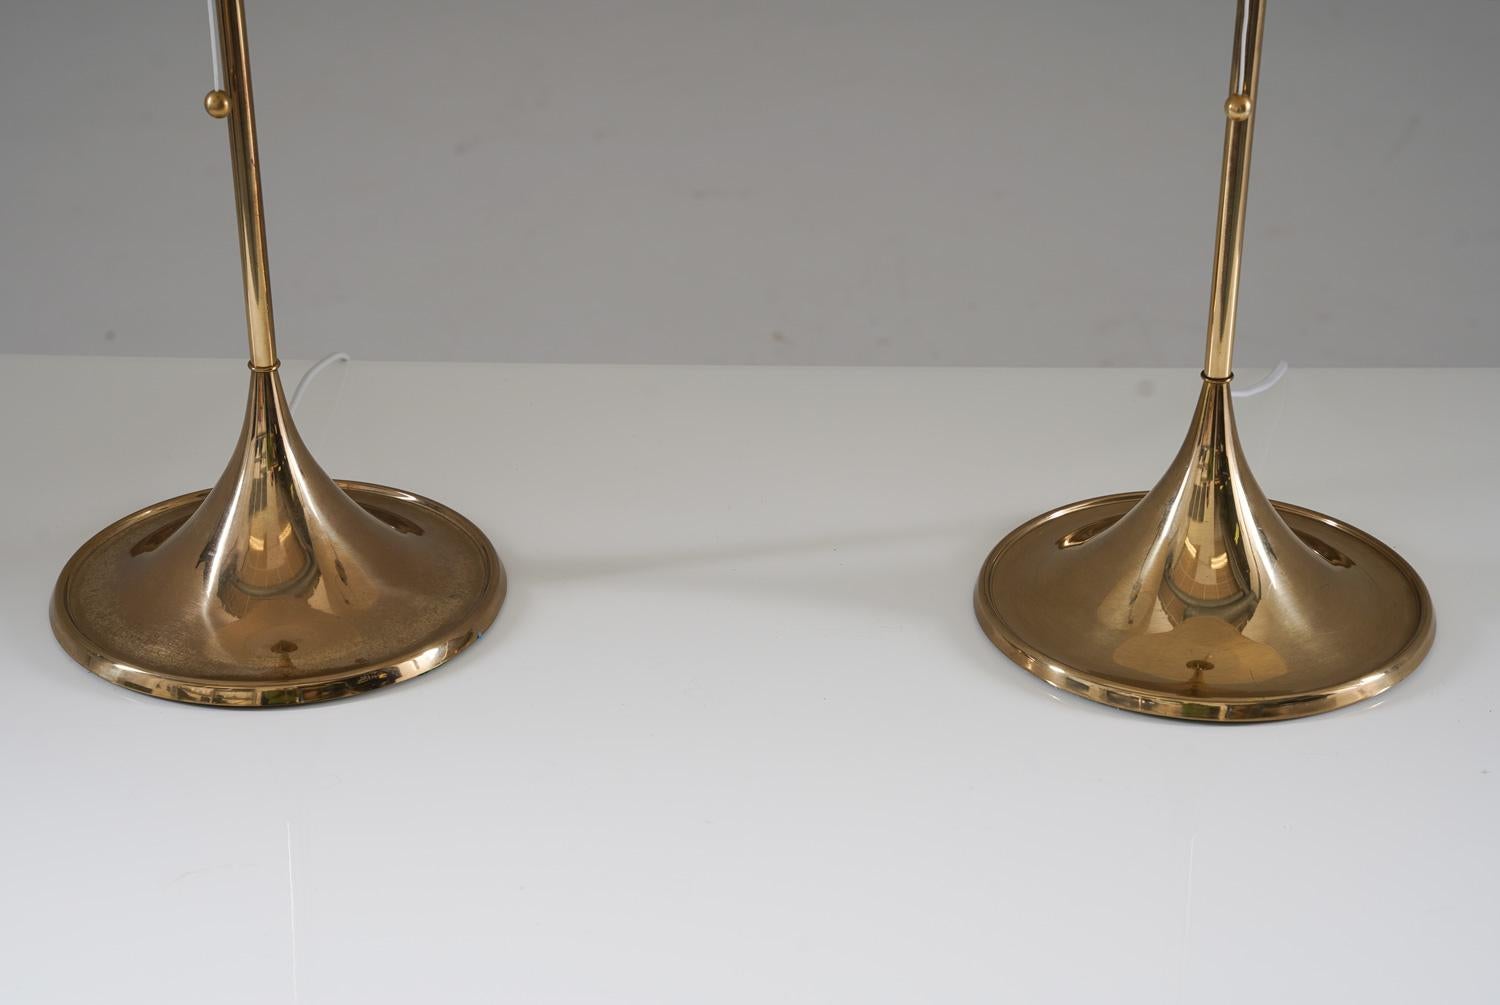 20th Century Midcentury Table Lamps in Brass by A. Svensson and Y. Sandström for Bergboms